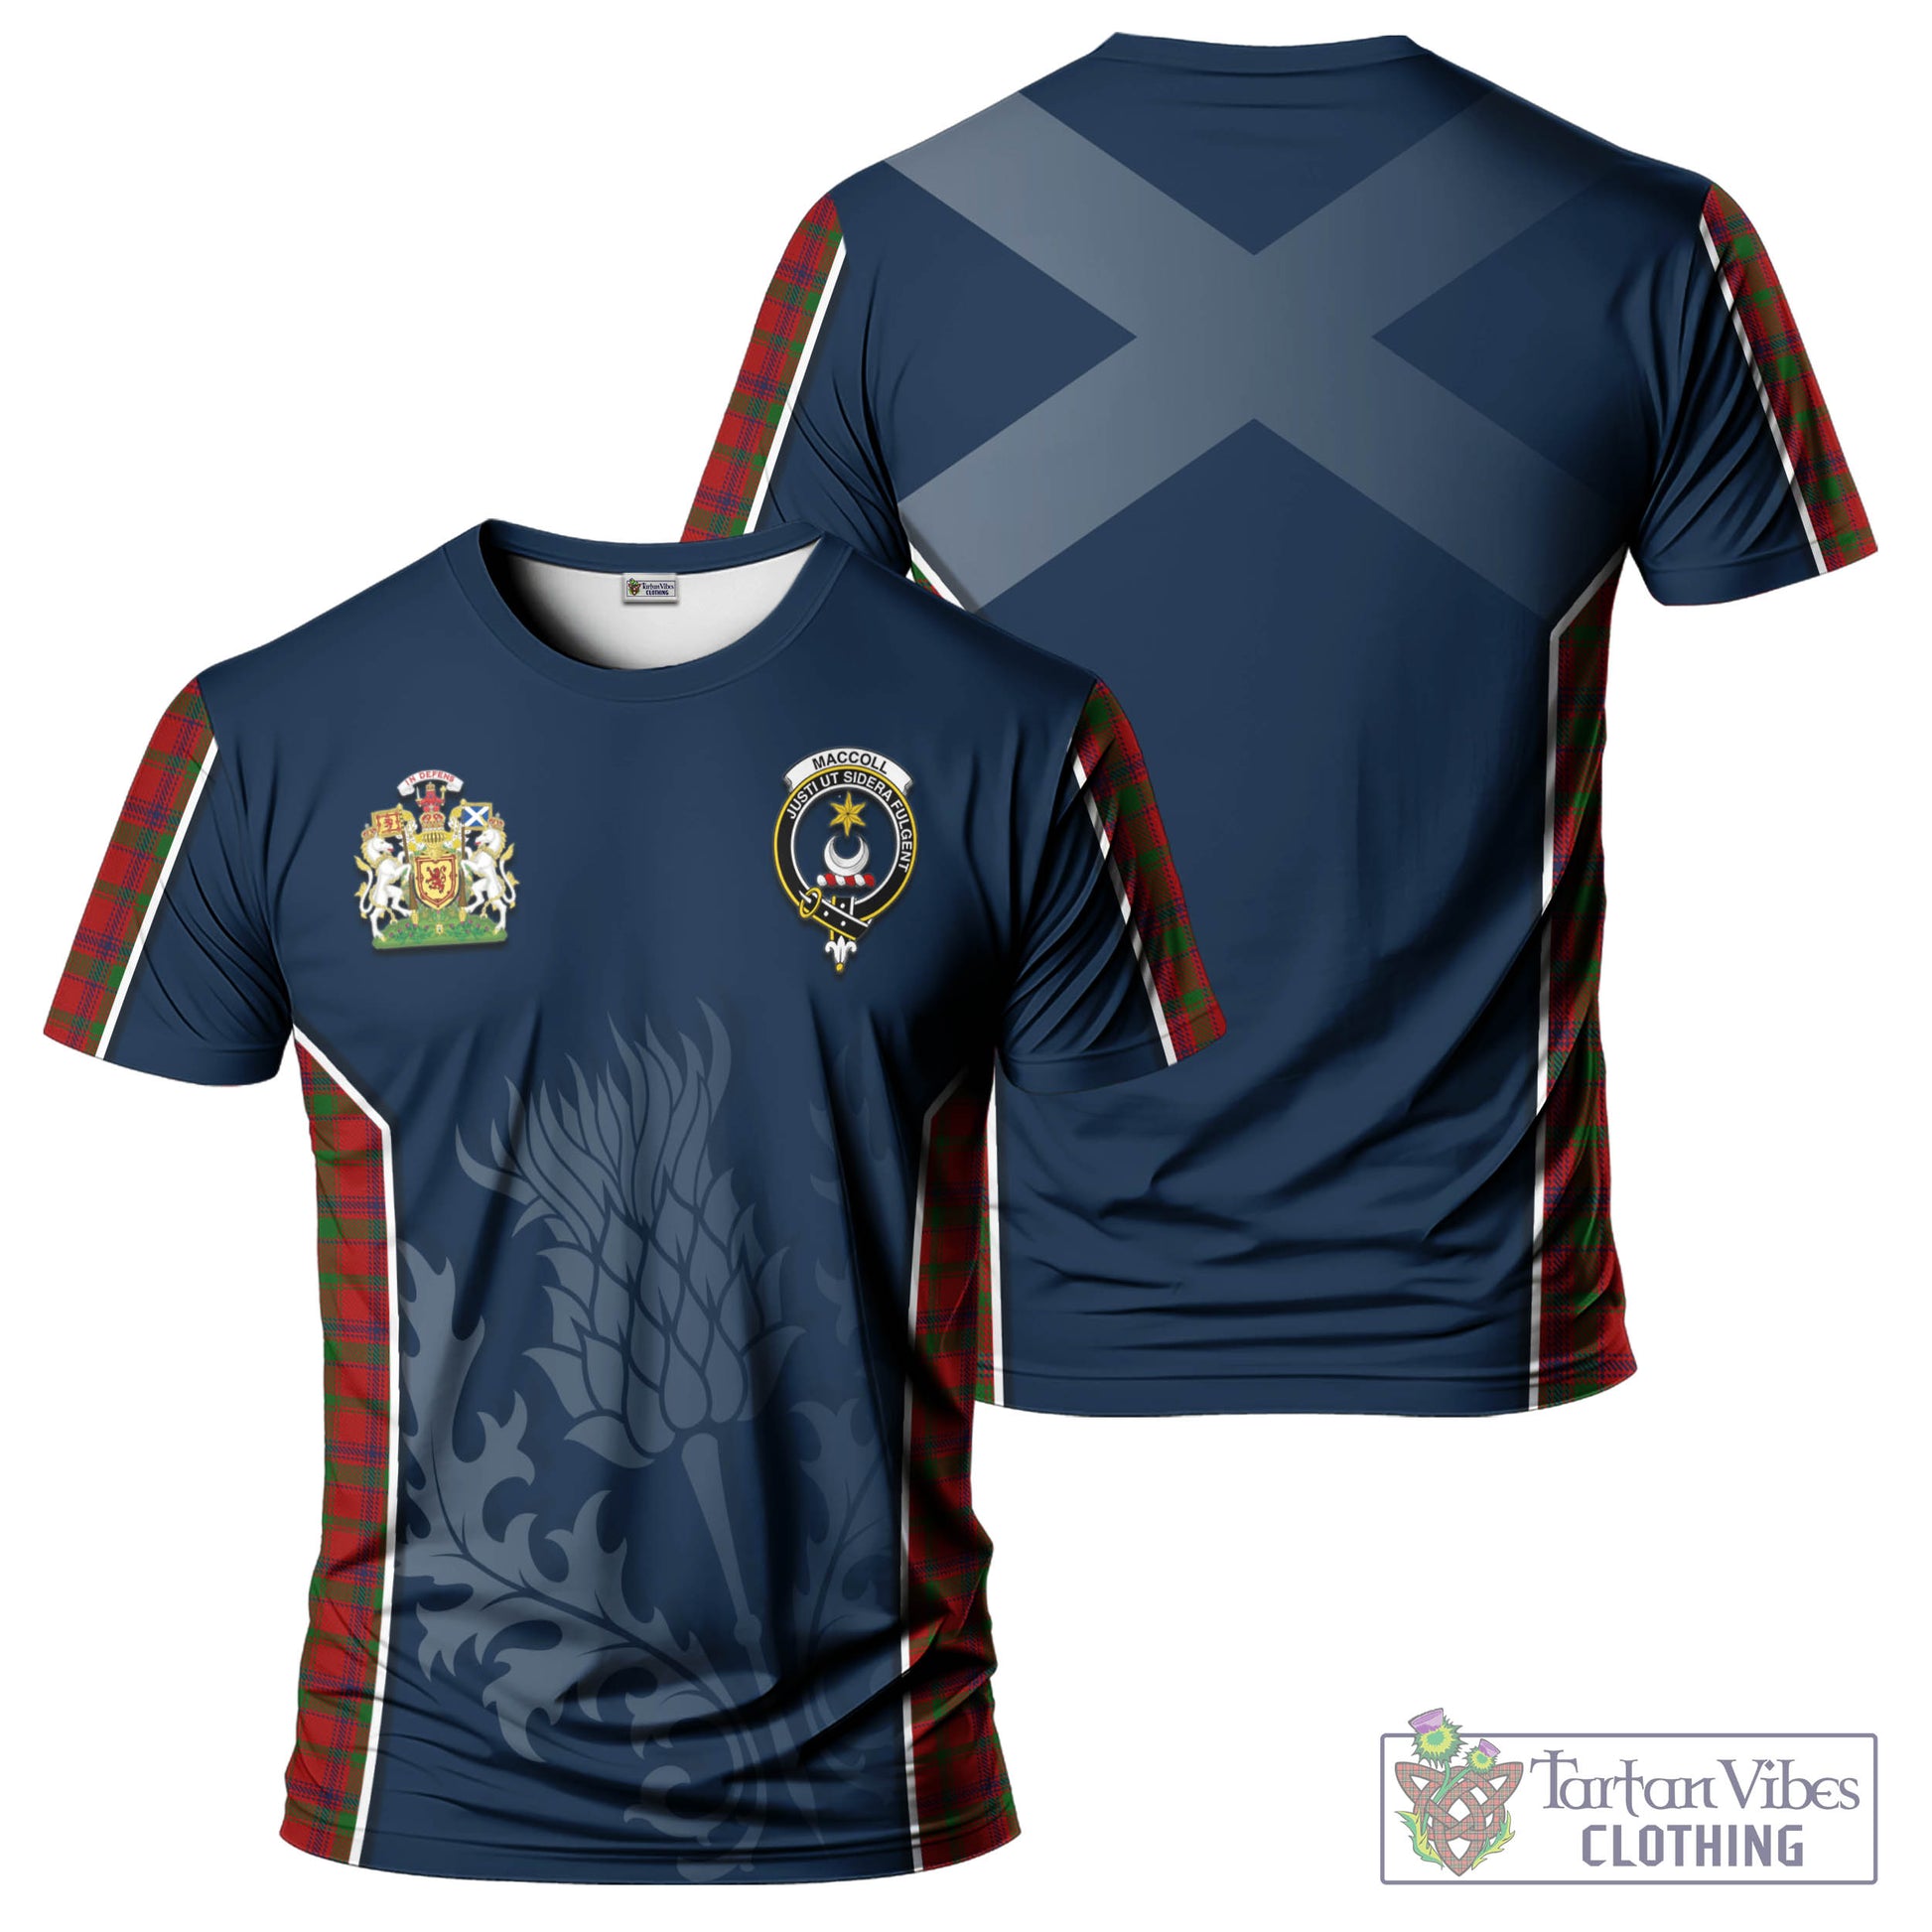 Tartan Vibes Clothing MacColl Tartan T-Shirt with Family Crest and Scottish Thistle Vibes Sport Style